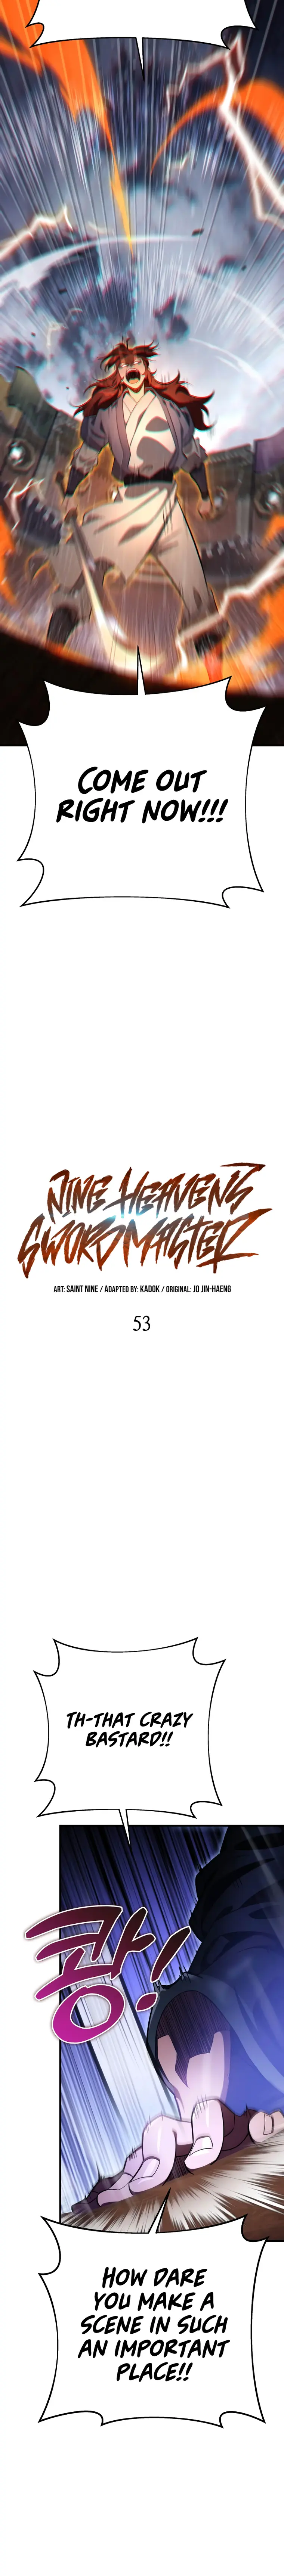 Heavenly Inquisition Sword chapter 53